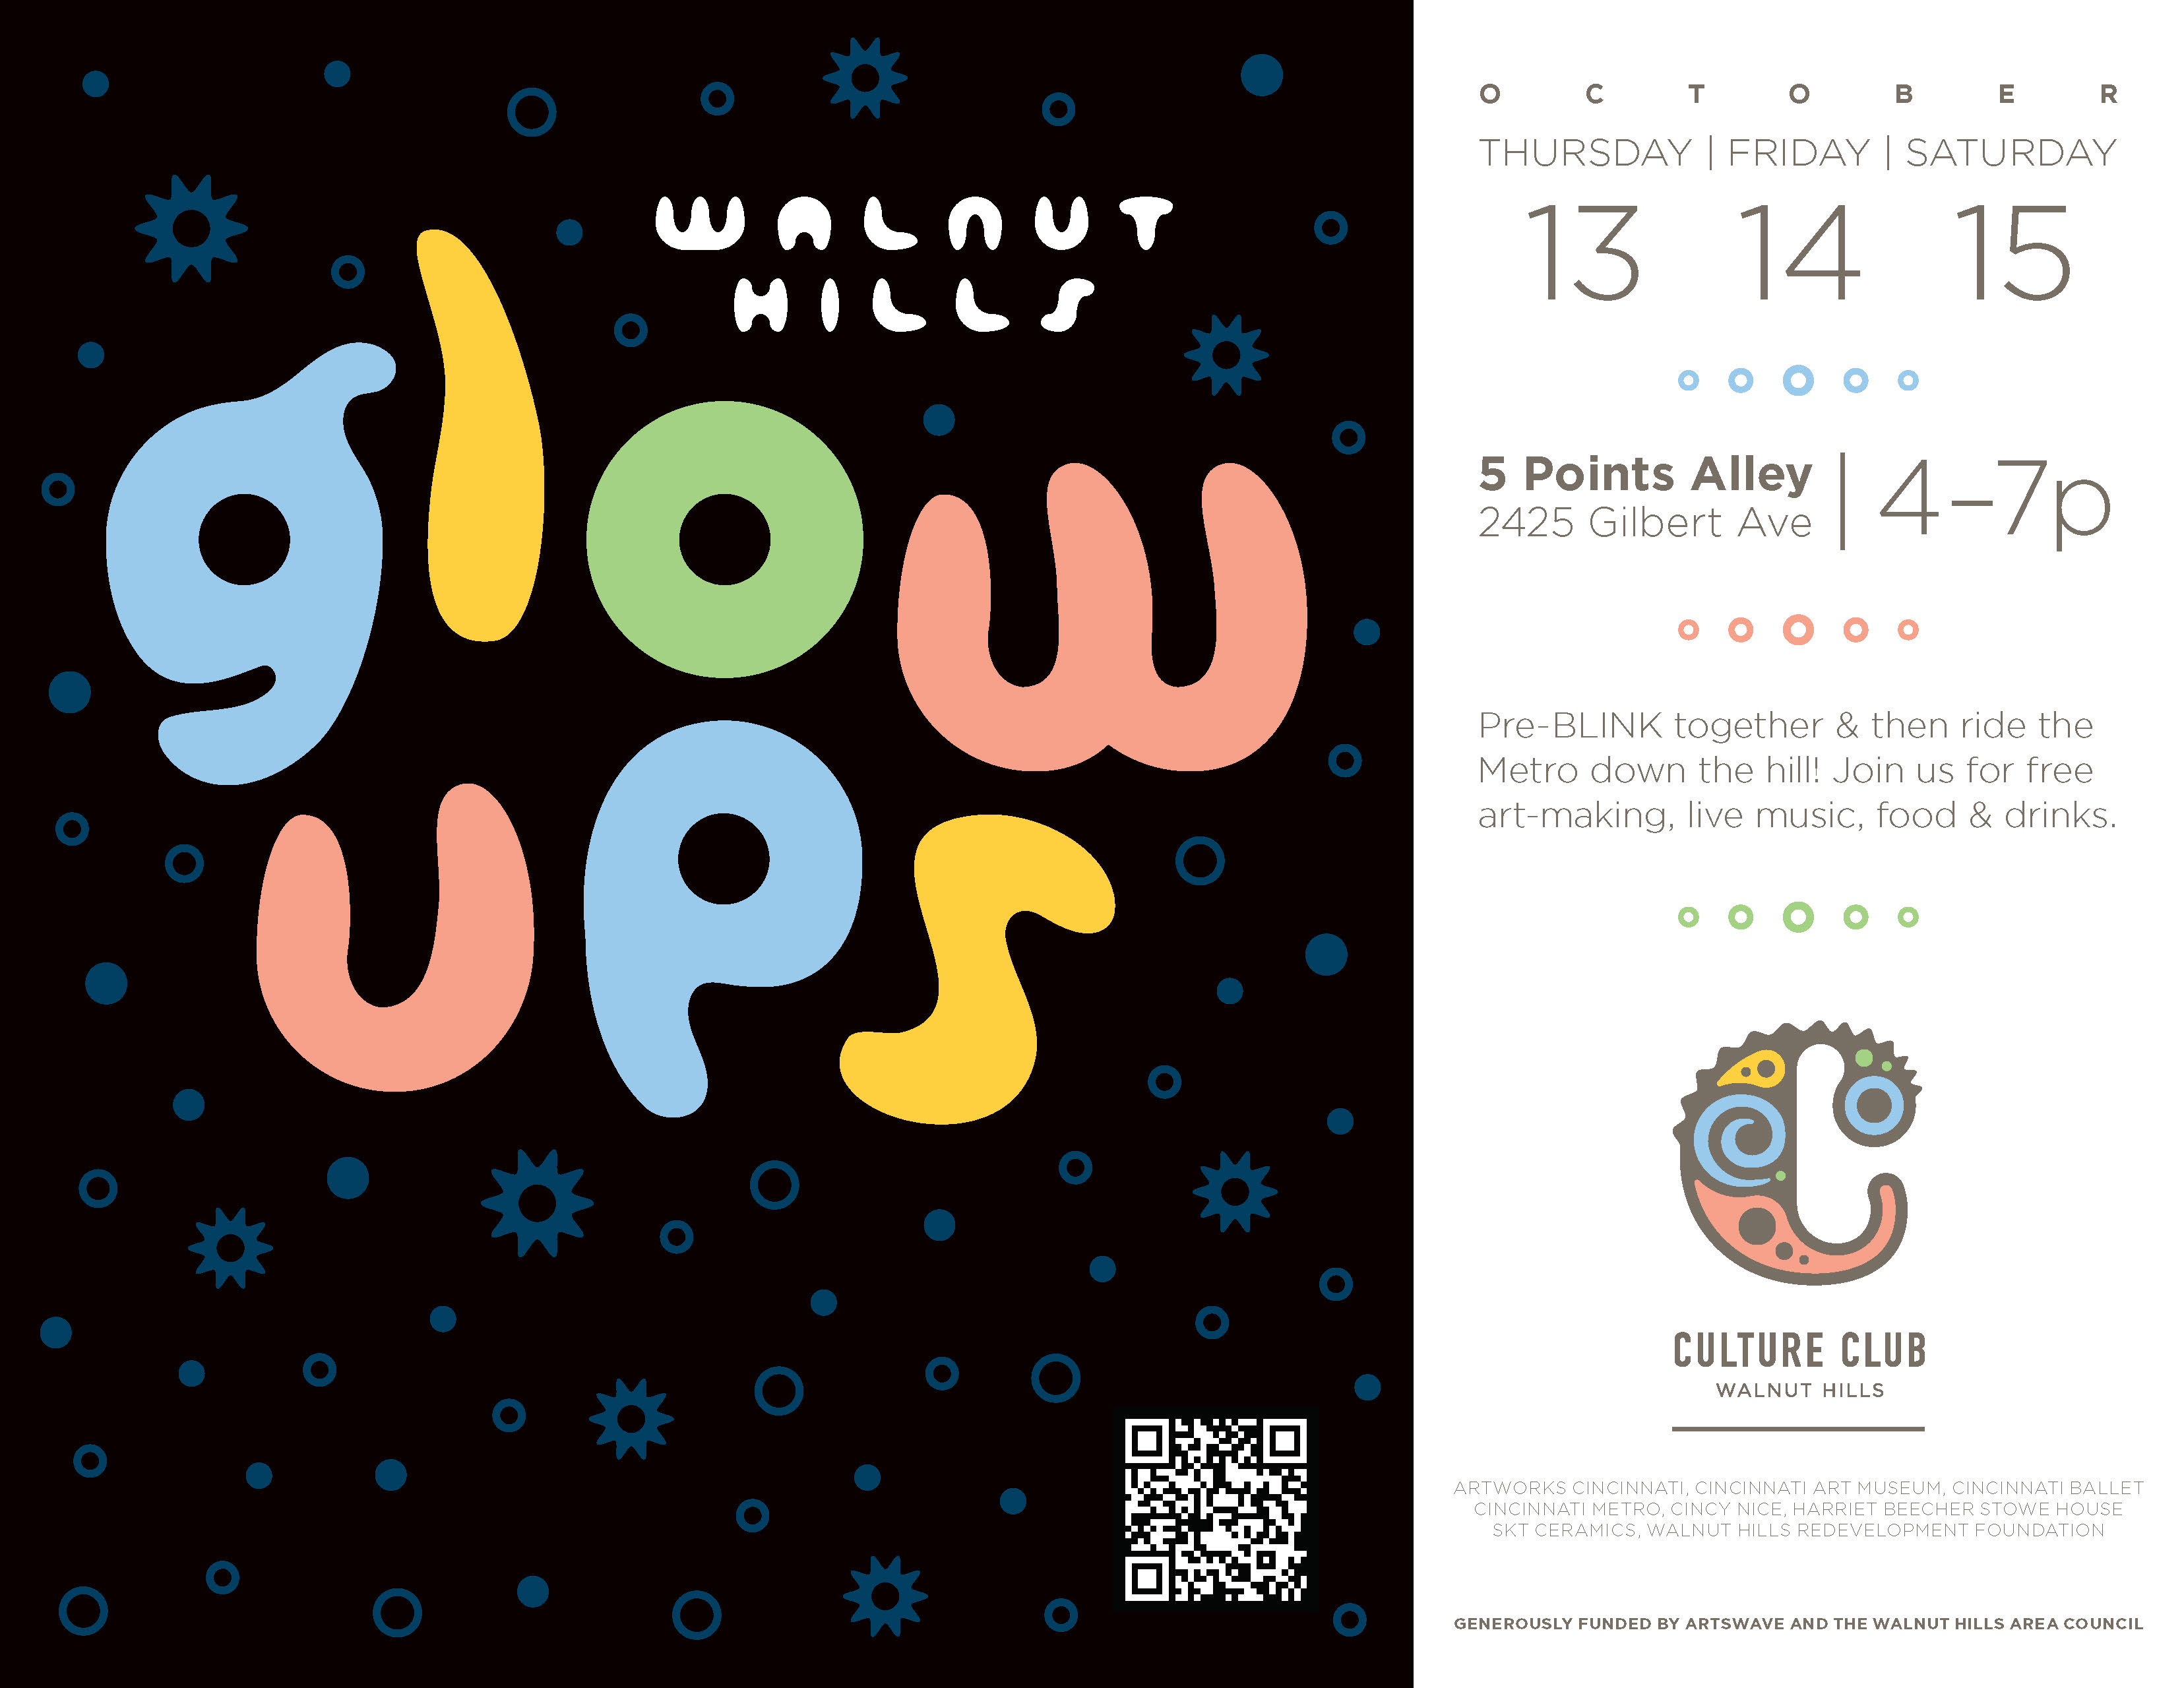 Walnut Hills Glow Up, hosted by CAM